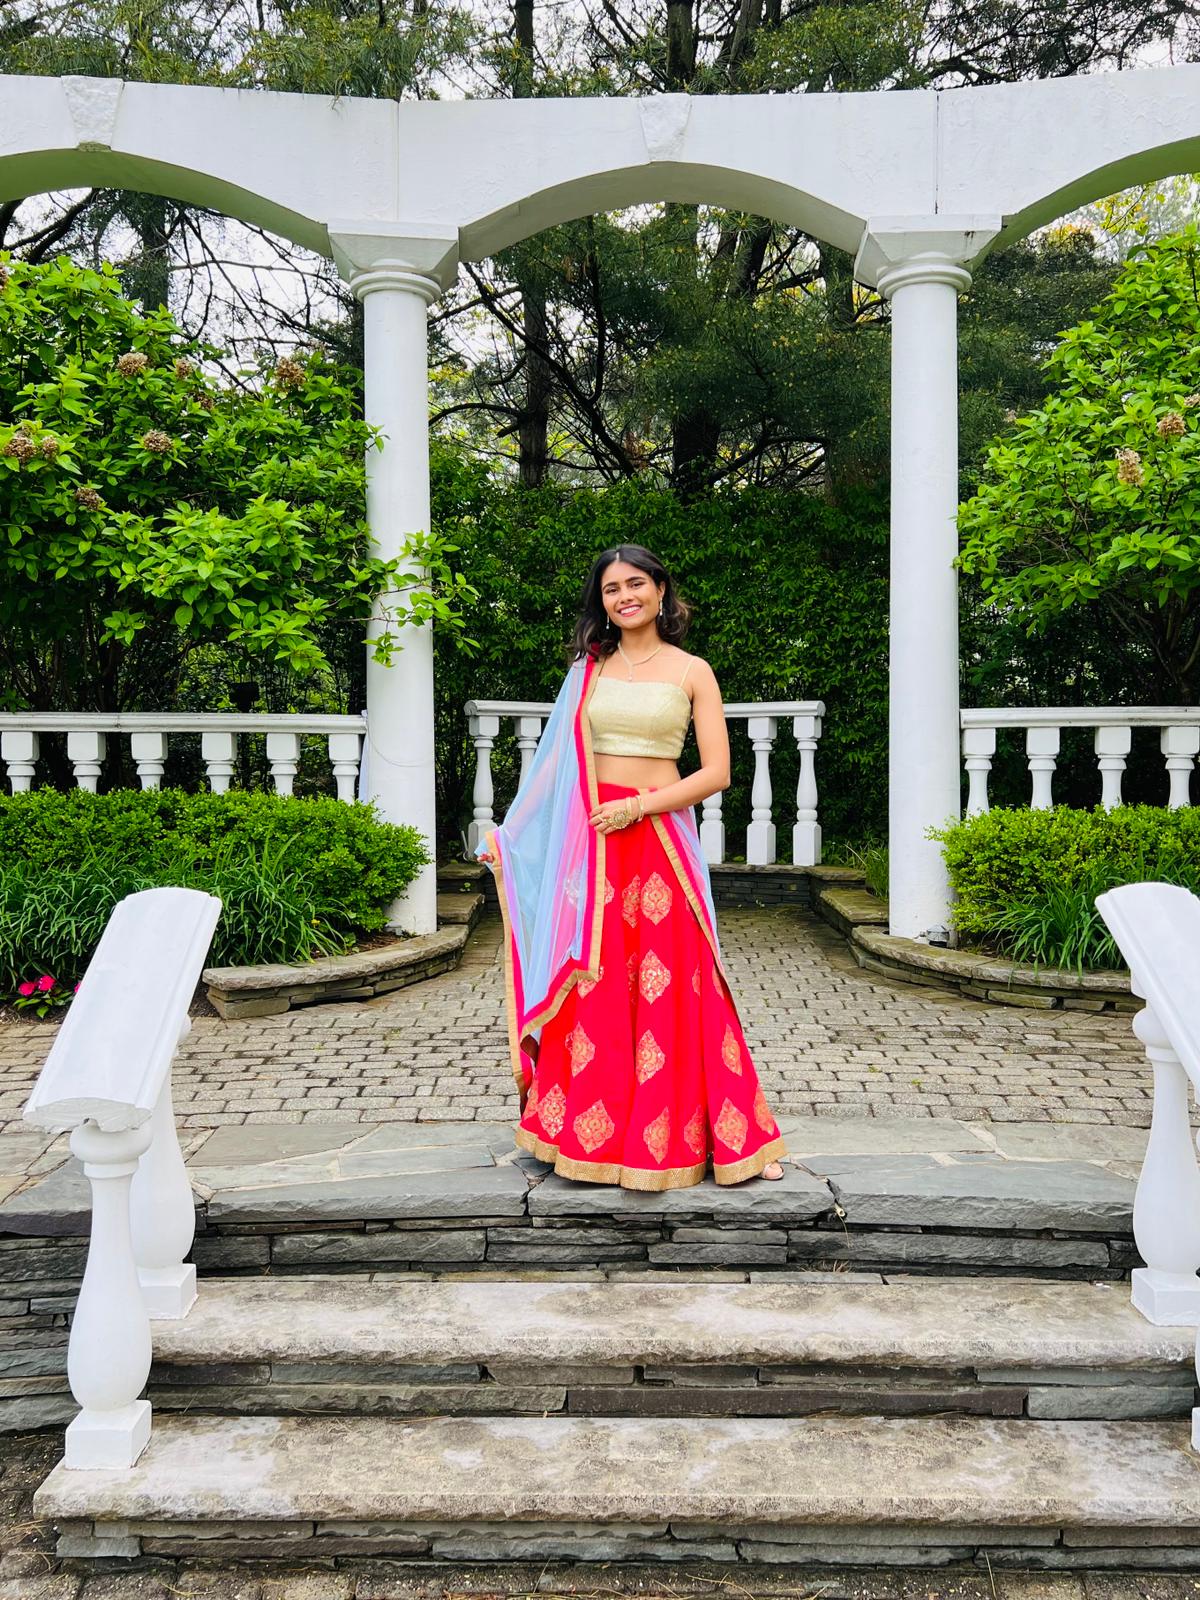 How to Dress in a Ghagra Choli (Indian Dress): 13 Steps